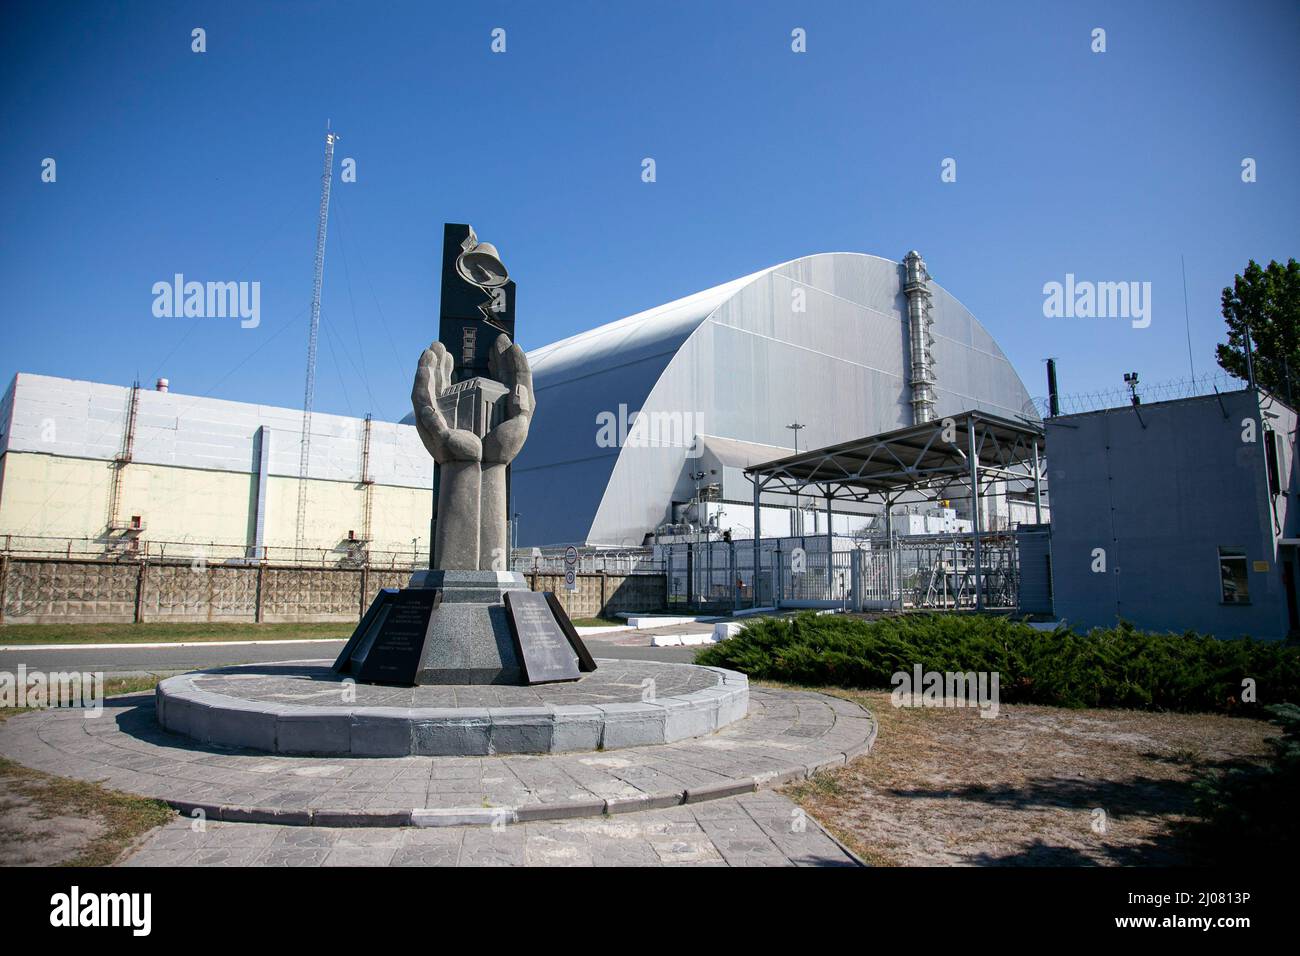 Pripyat, Ukraine. 5th Sep, 2019. A sculpture of cupped hands holding a power plant was erected in 2006 outside of Chernobyl Nuclear Power Plant number 4 to the remembrance of the shift actions of plant workers and emergency crew who prevented what well could have been a catastrophe of global proportions. The situation of the Chernobyl nuclear plant remains at high risk according to the Ukrainian government since the Russian Force captured the area. The Russian Force repeatedly halt the energy supply to the nuclear plant which was used to cool down the core of the destroyed number 4 nuclear Stock Photo